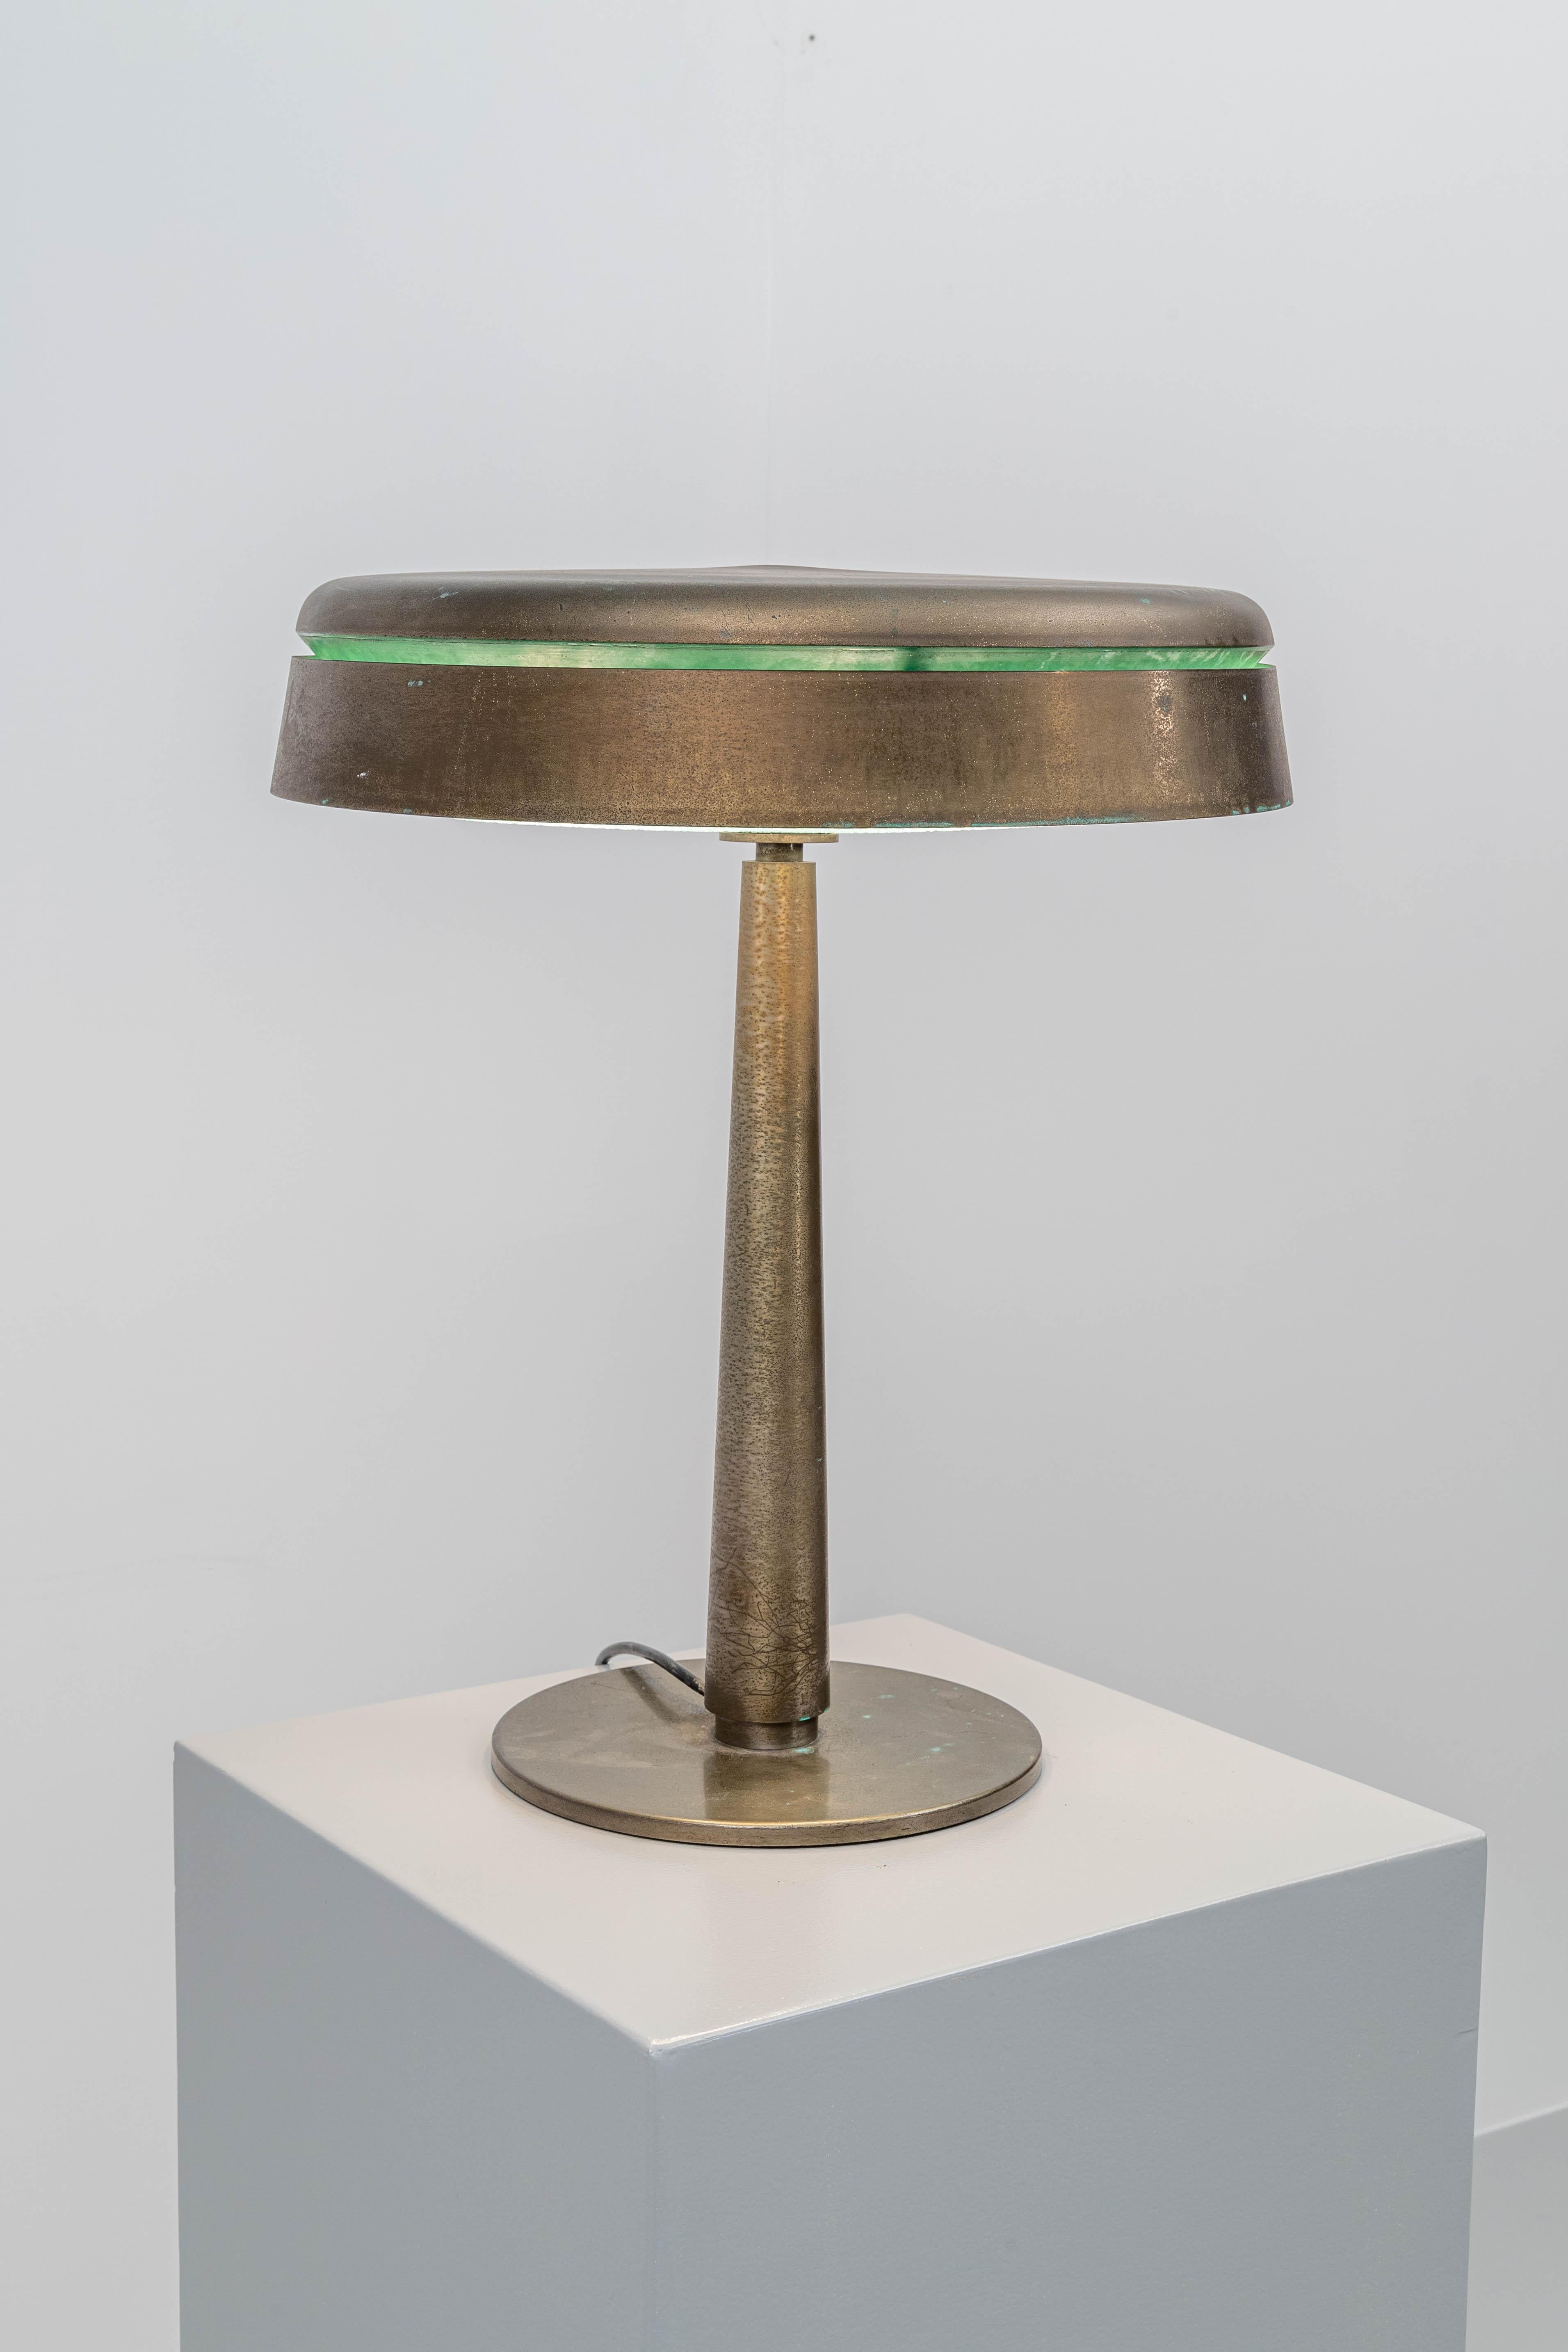 Painted Max Ingrand Table Lamp #2278 for Fontana Arte, Italy, 1960 For Sale